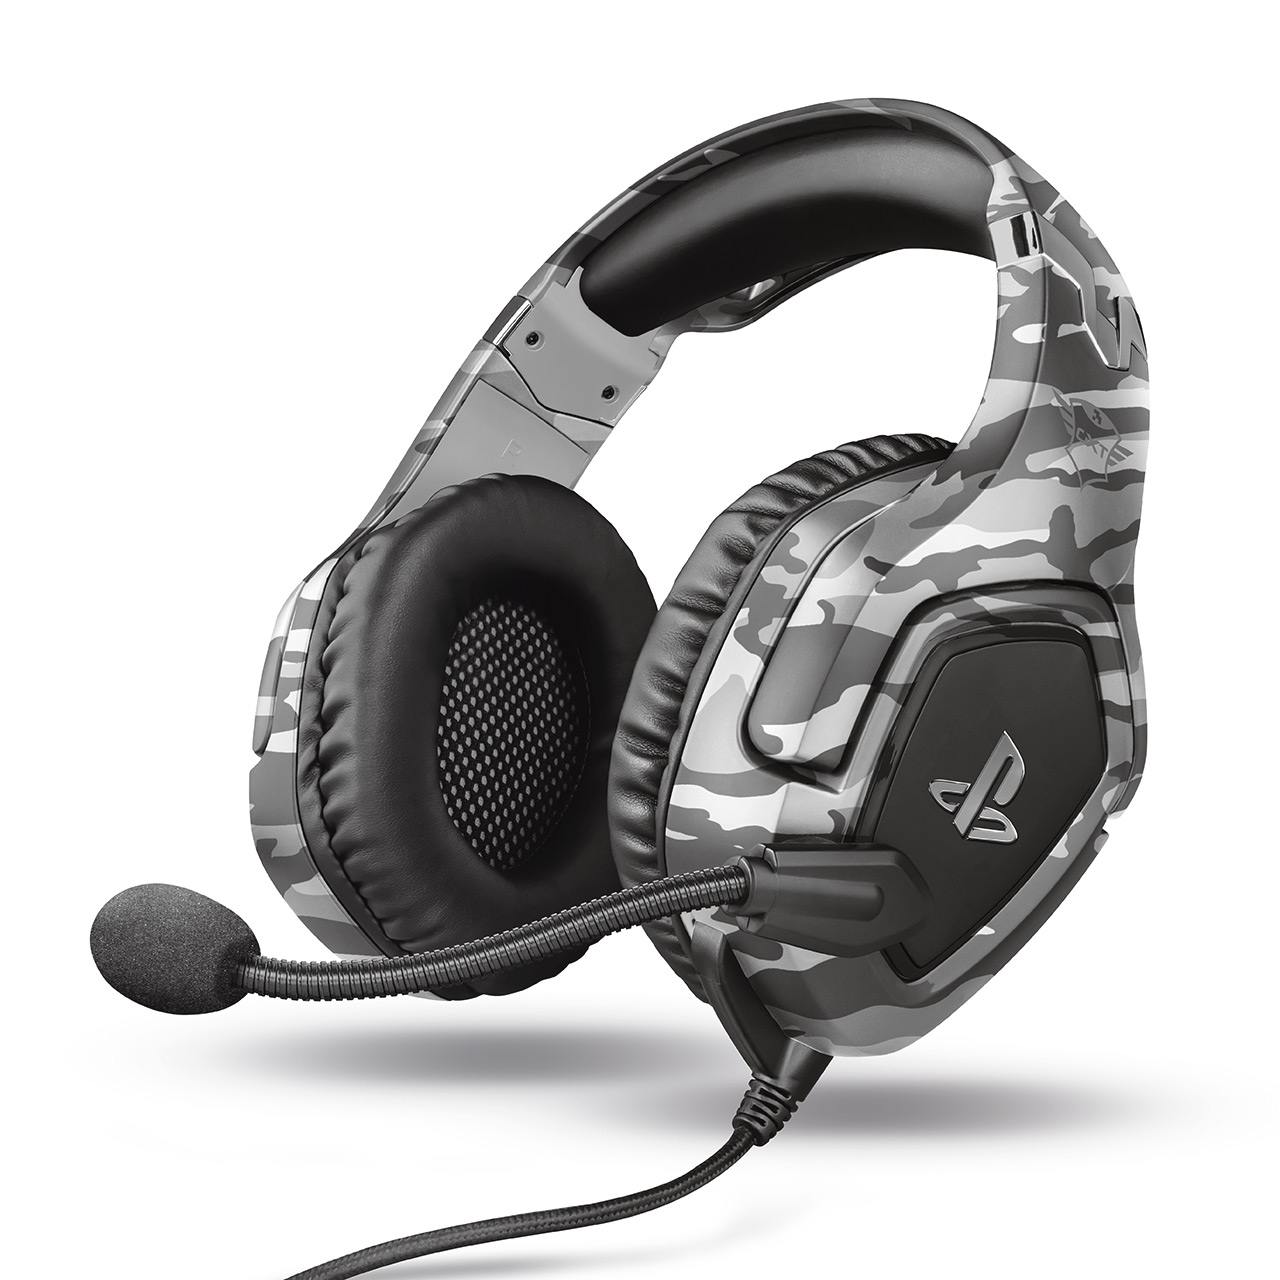 GXT-488-Forze-G-PS4-Gaming-Headset-PlayStation